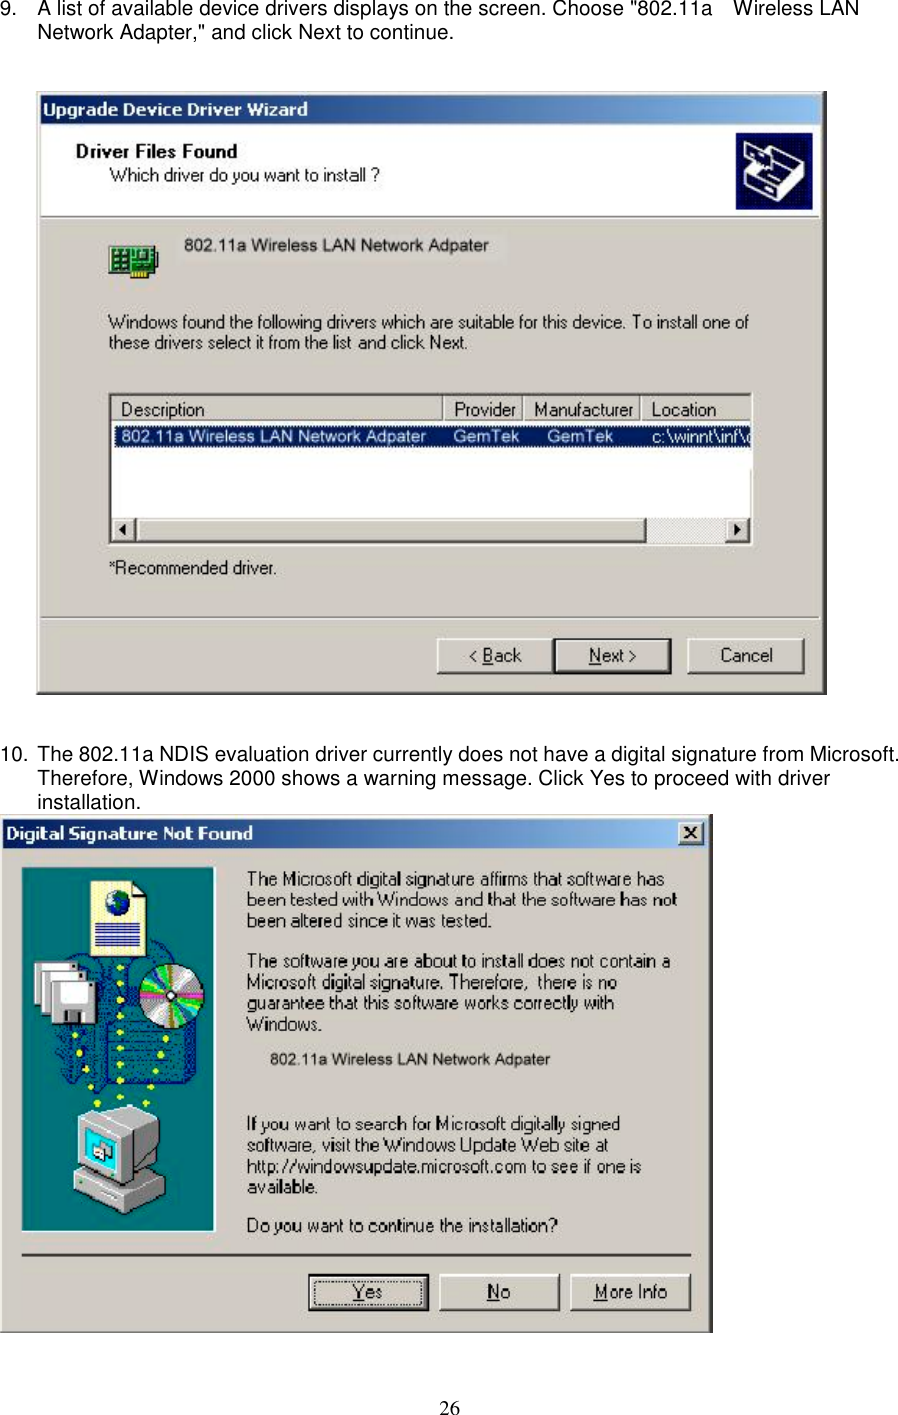 269.  A list of available device drivers displays on the screen. Choose &quot;802.11a    Wireless LANNetwork Adapter,&quot; and click Next to continue.10.  The 802.11a NDIS evaluation driver currently does not have a digital signature from Microsoft.Therefore, Windows 2000 shows a warning message. Click Yes to proceed with driverinstallation.